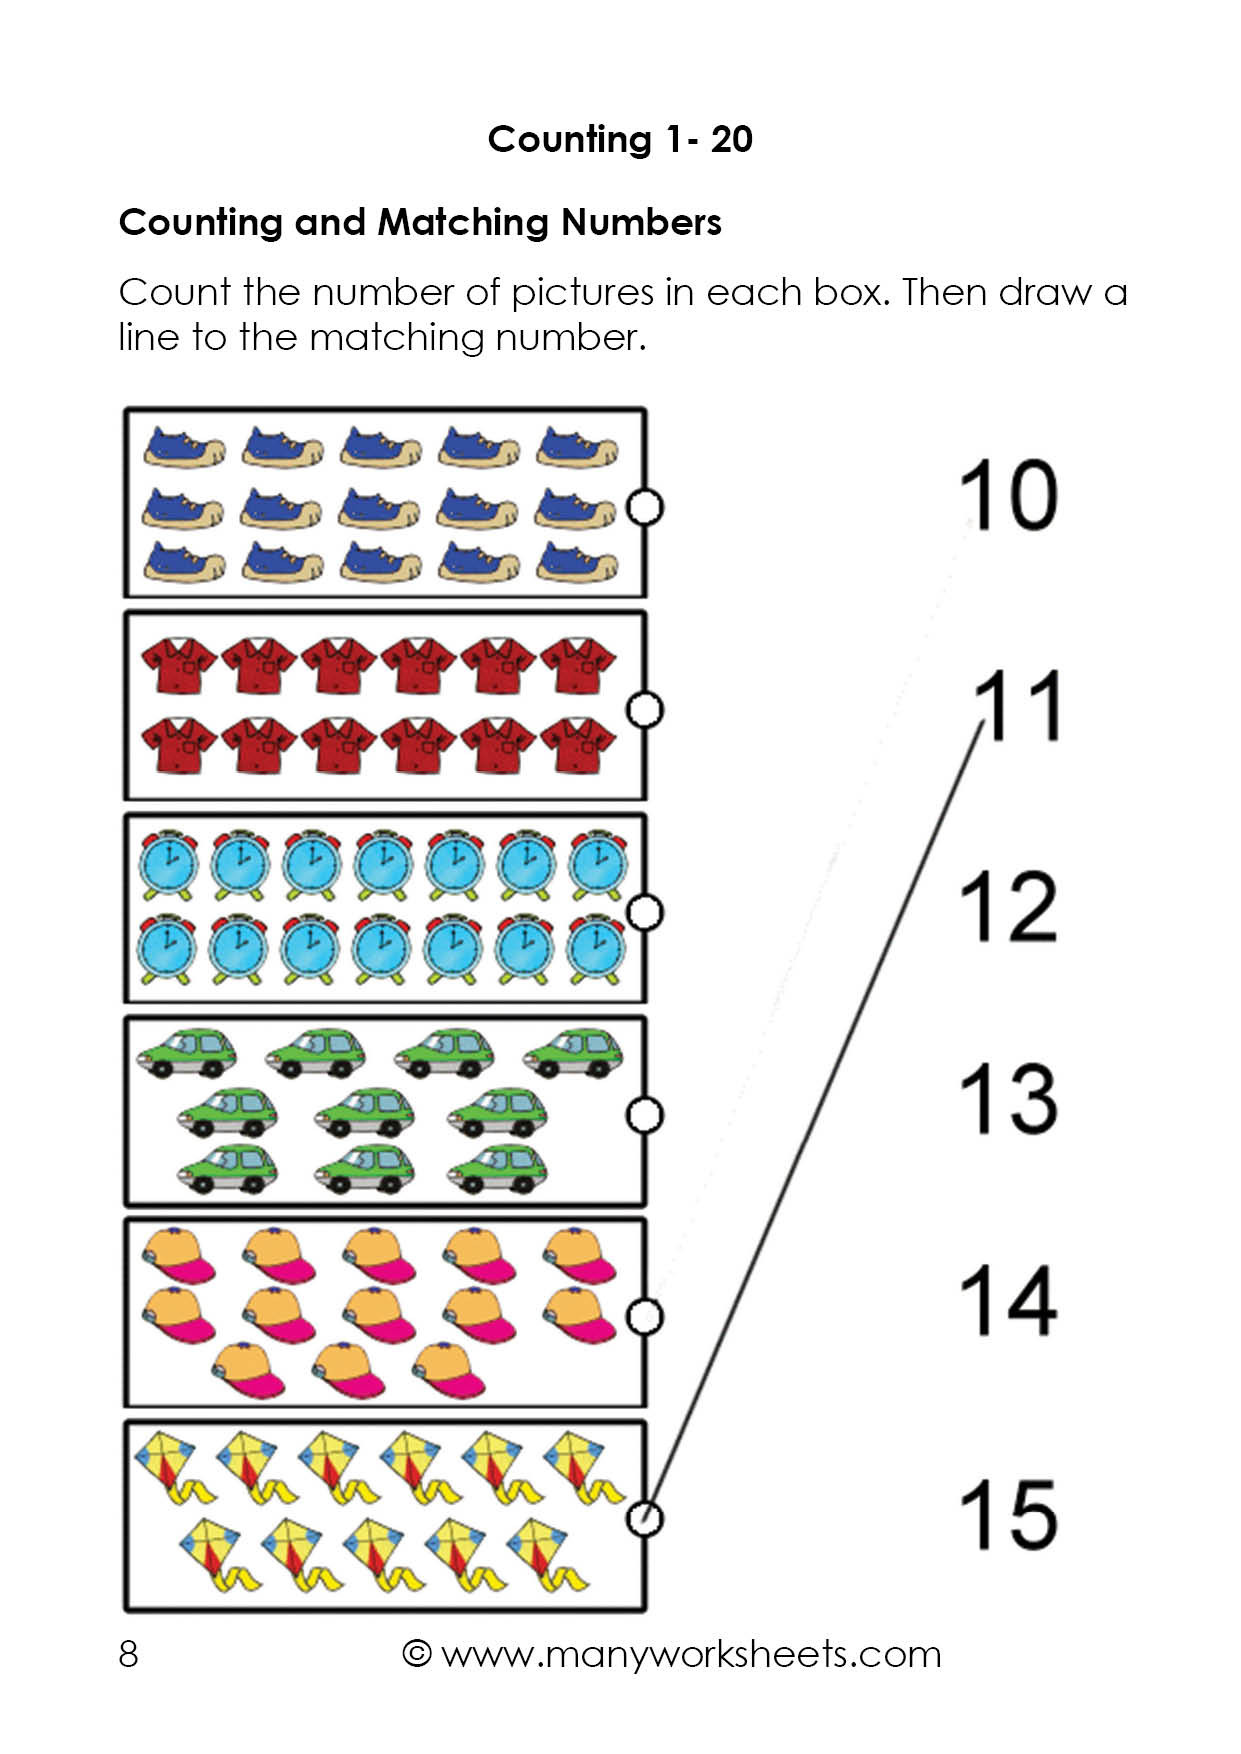 Counting to 20 Worksheet Counting to 20 and Matching Numbers Worksheets